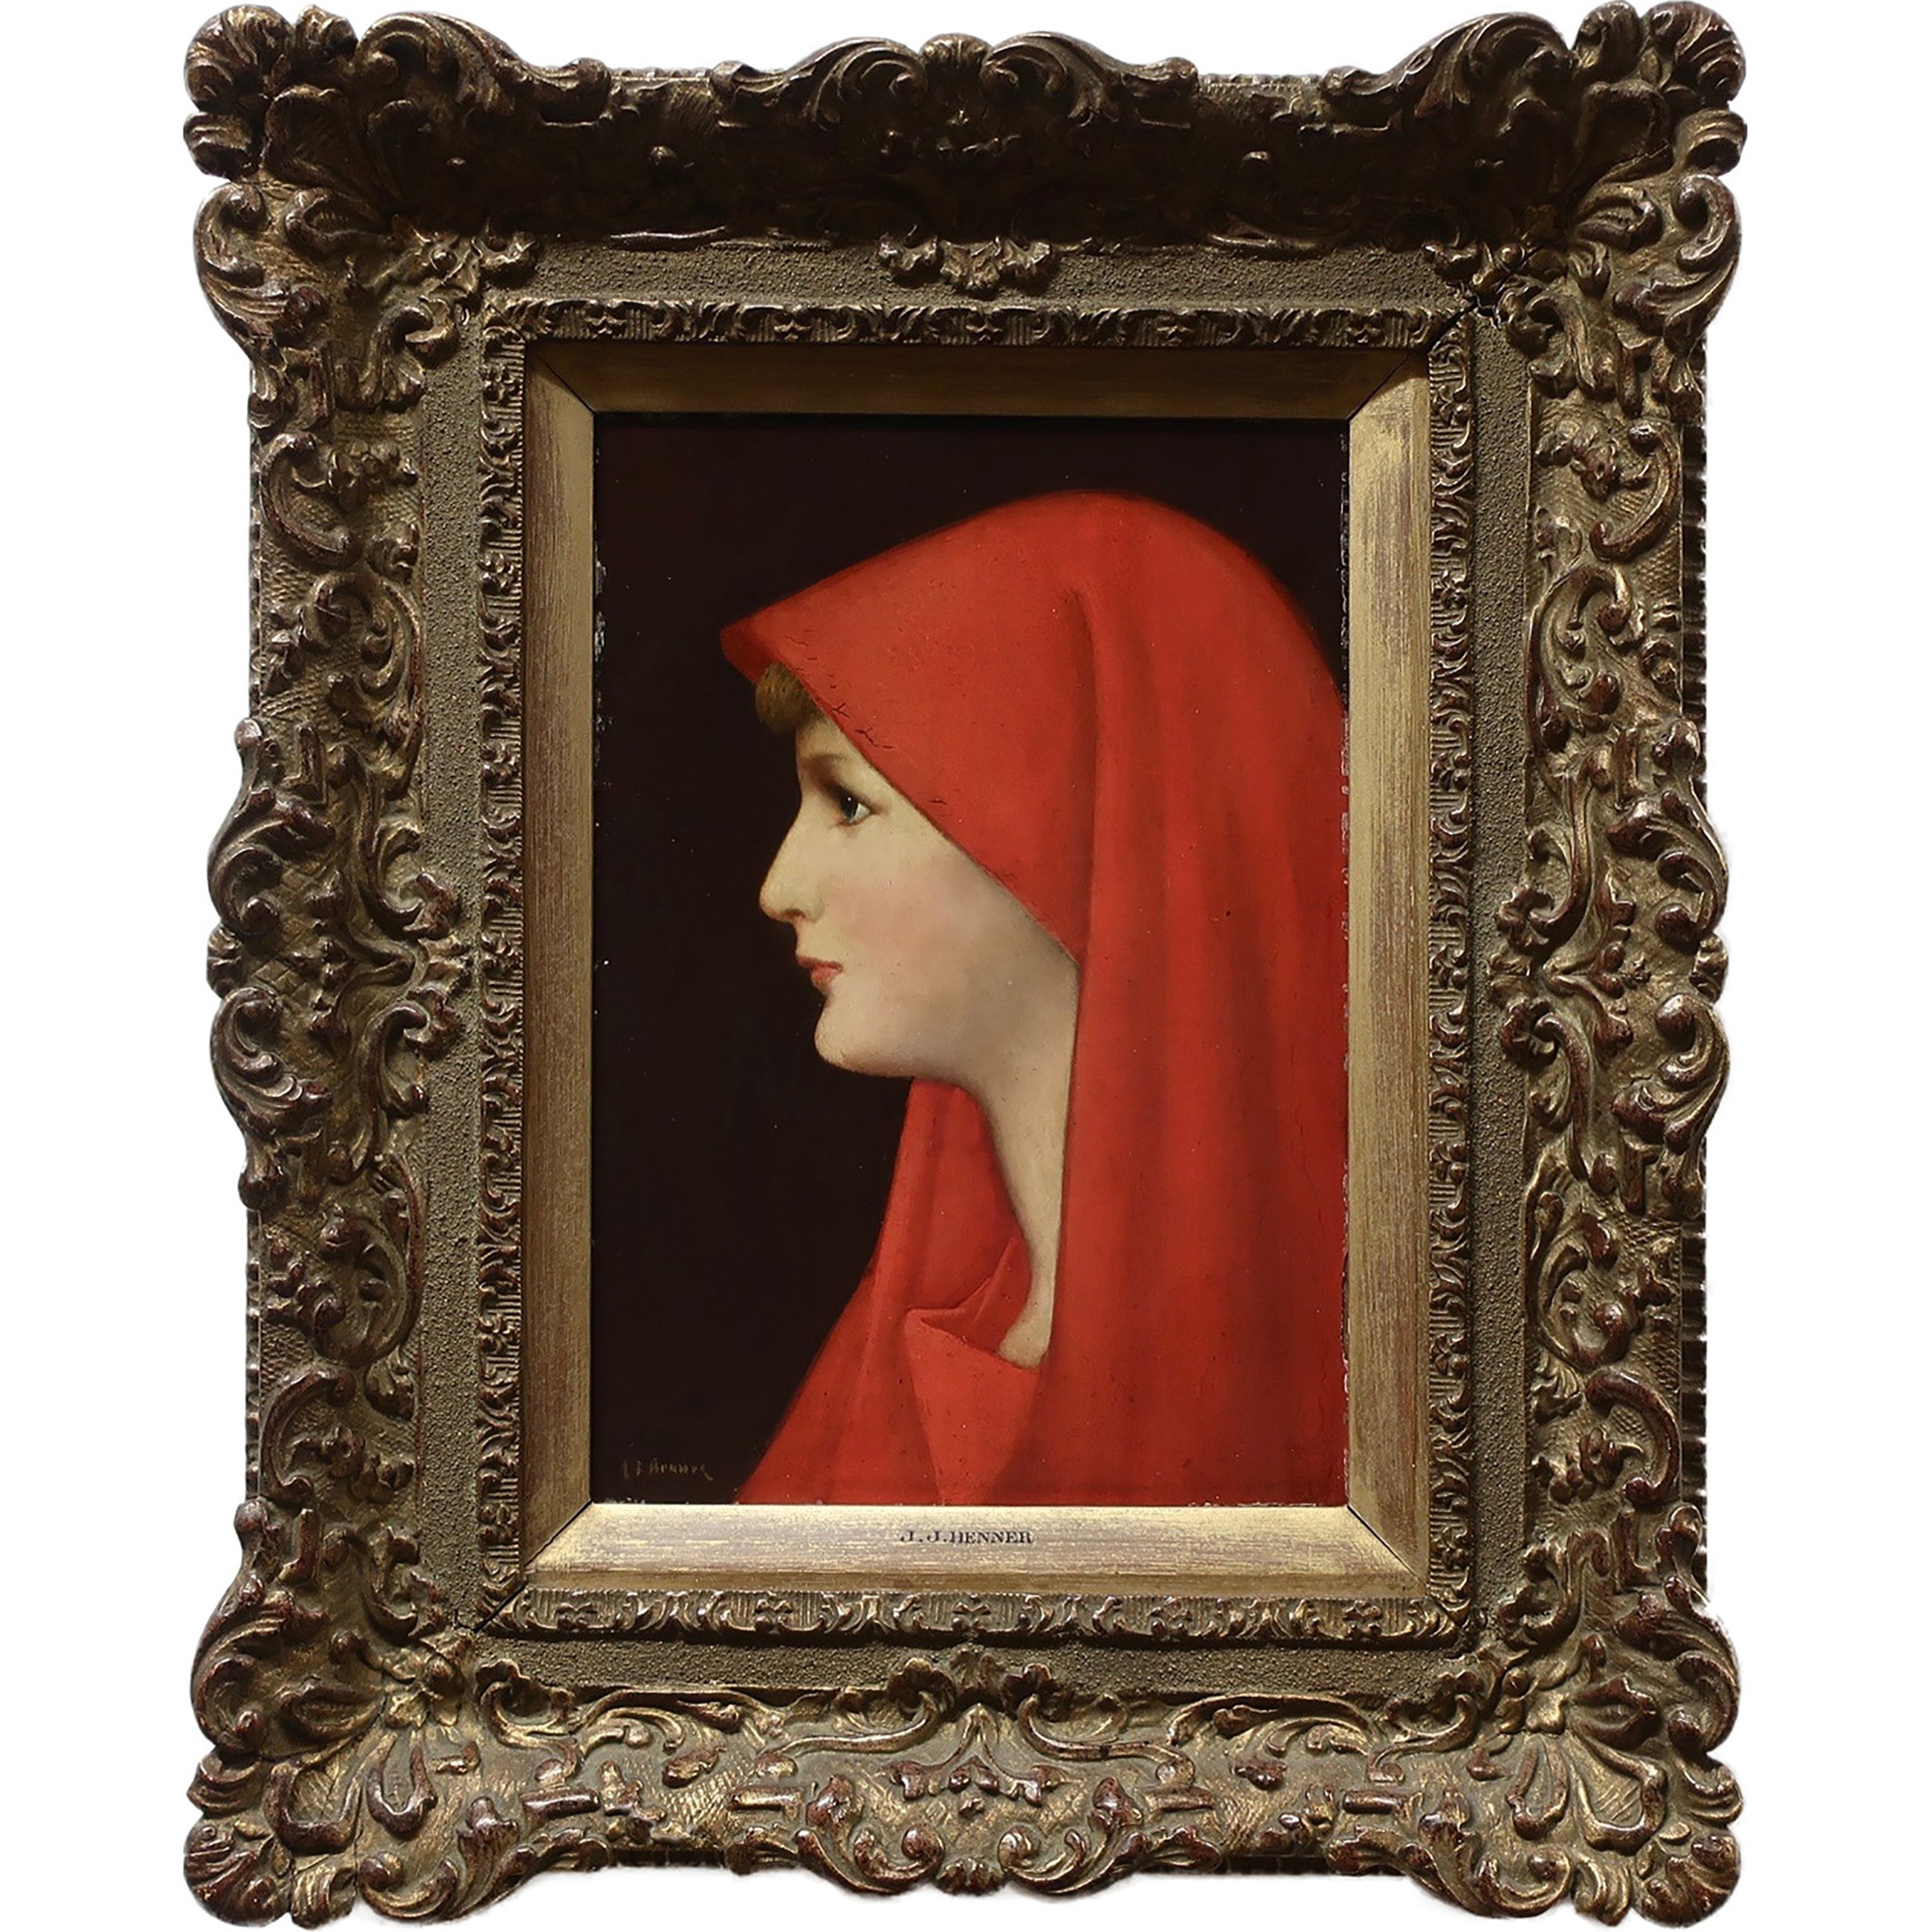 Artwork by Jean-Jacques Henner, FABIOLA, Made of OIL ON PANEL